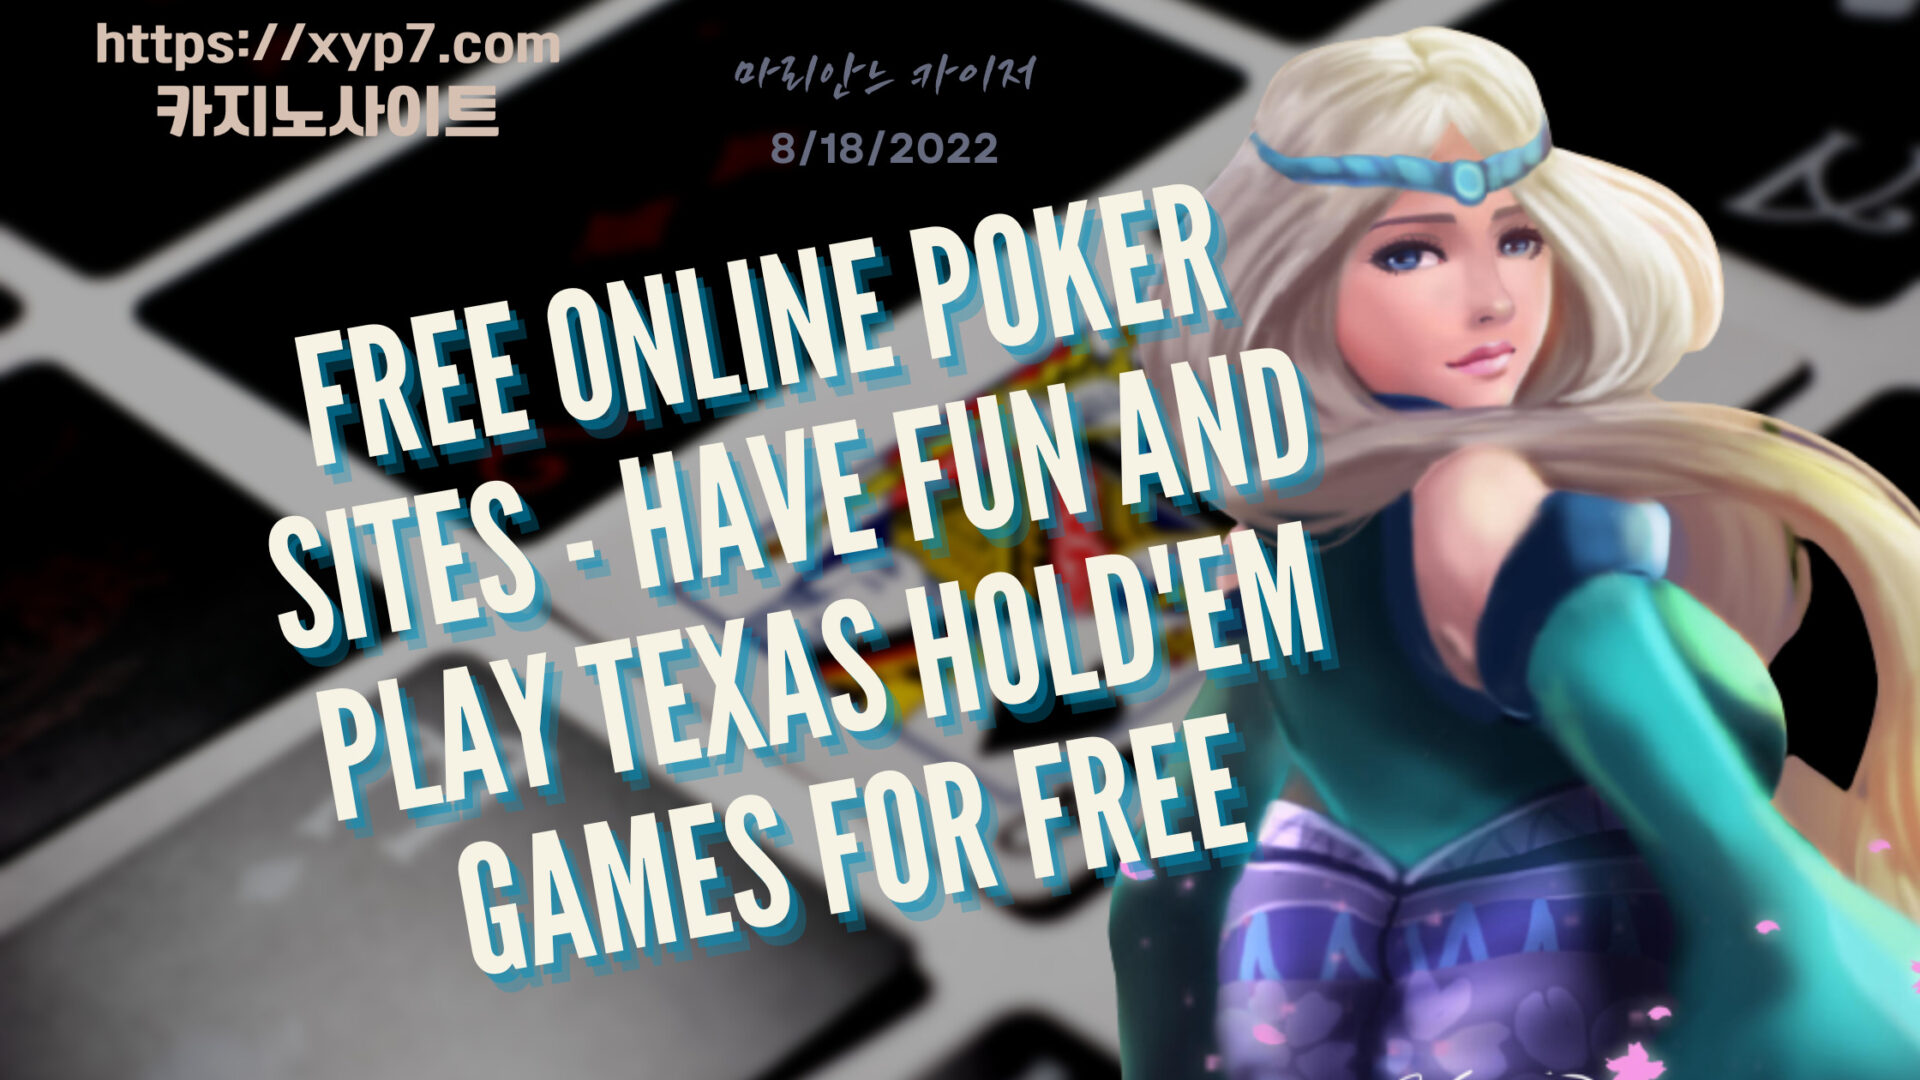 FREE ONLINE POKER SITES - HAVE FUN AND PLAY TEXAS HOLD'EM GAMES FOR FREE